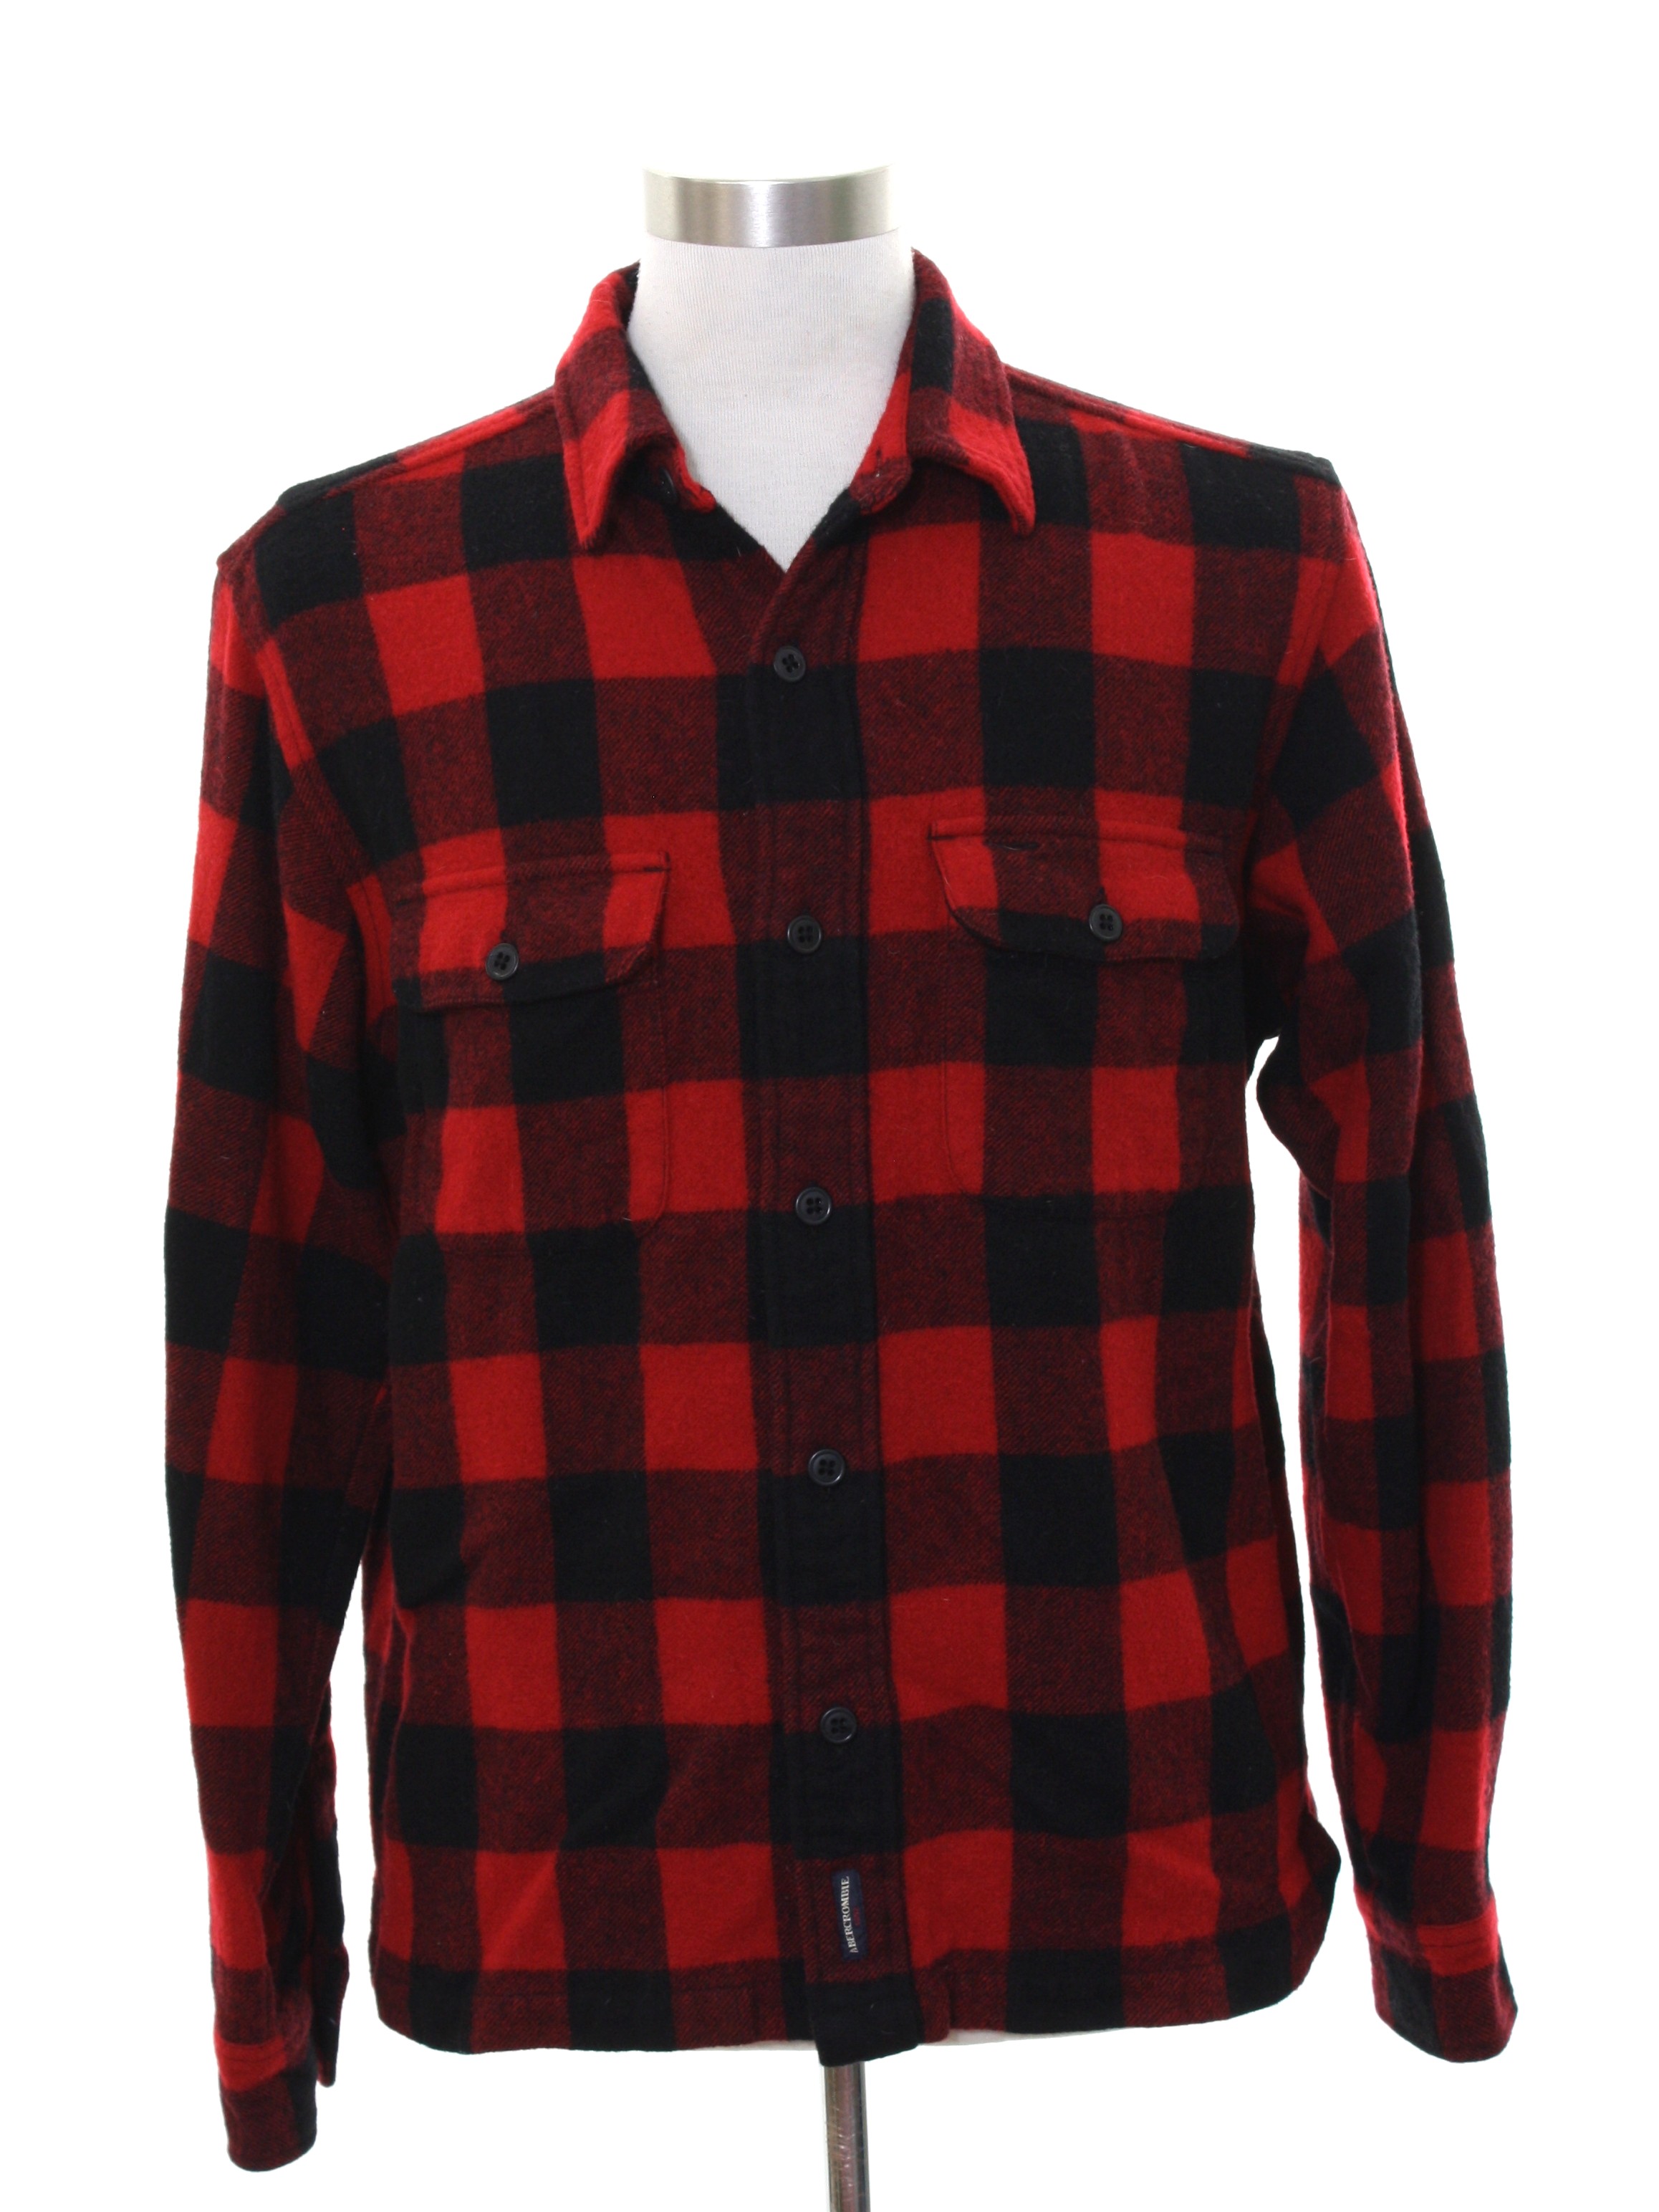 abercrombie & fitch flannel